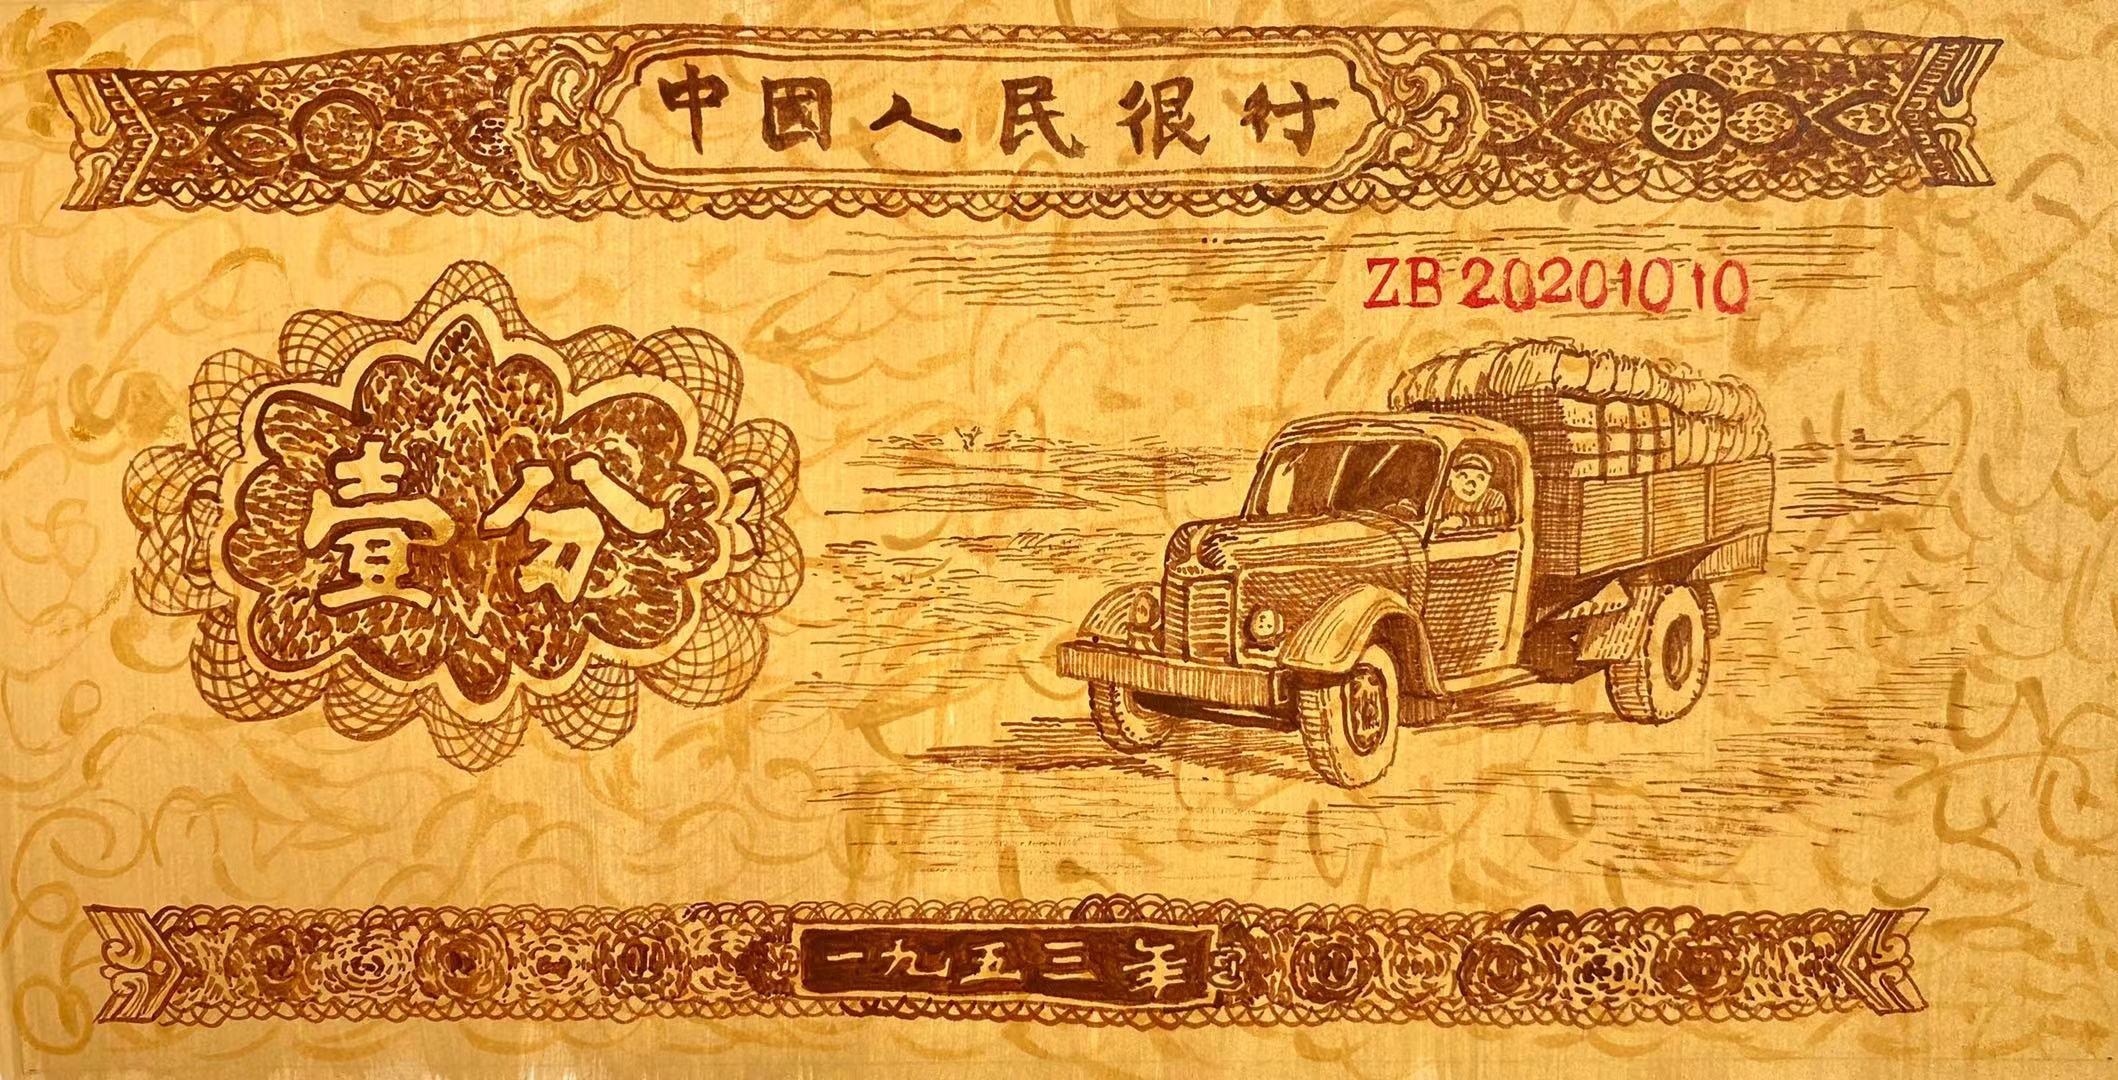 Zhang Bo Figurative Painting - Old Version RMB Paper Money one Cent Big Truck in 1950s